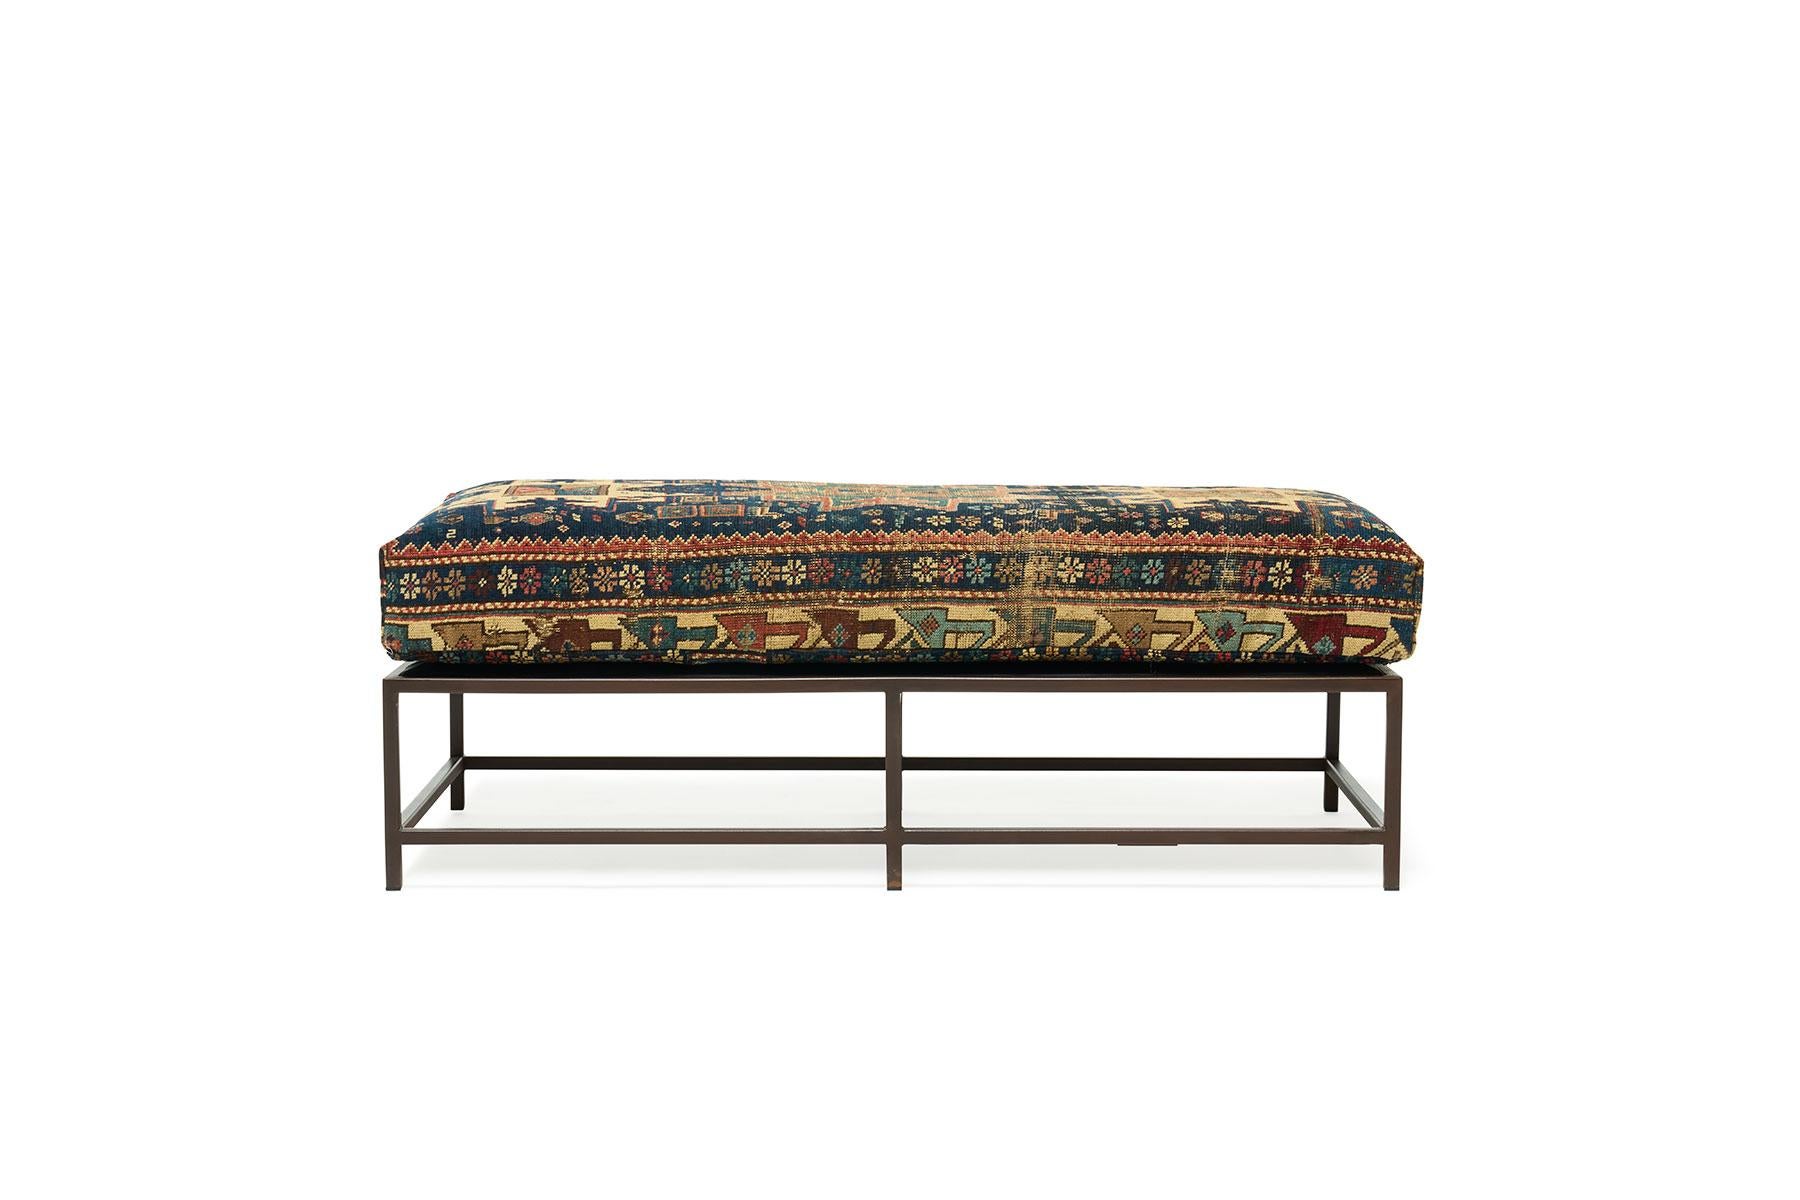 This bench, in the style of Stephen's Kenn Inheritance Collection, has been upholstered with an antique rug from the collection of King Kennedy rugs. The textile has been lovingly repaired and reinforced, without losing any of the beautiful